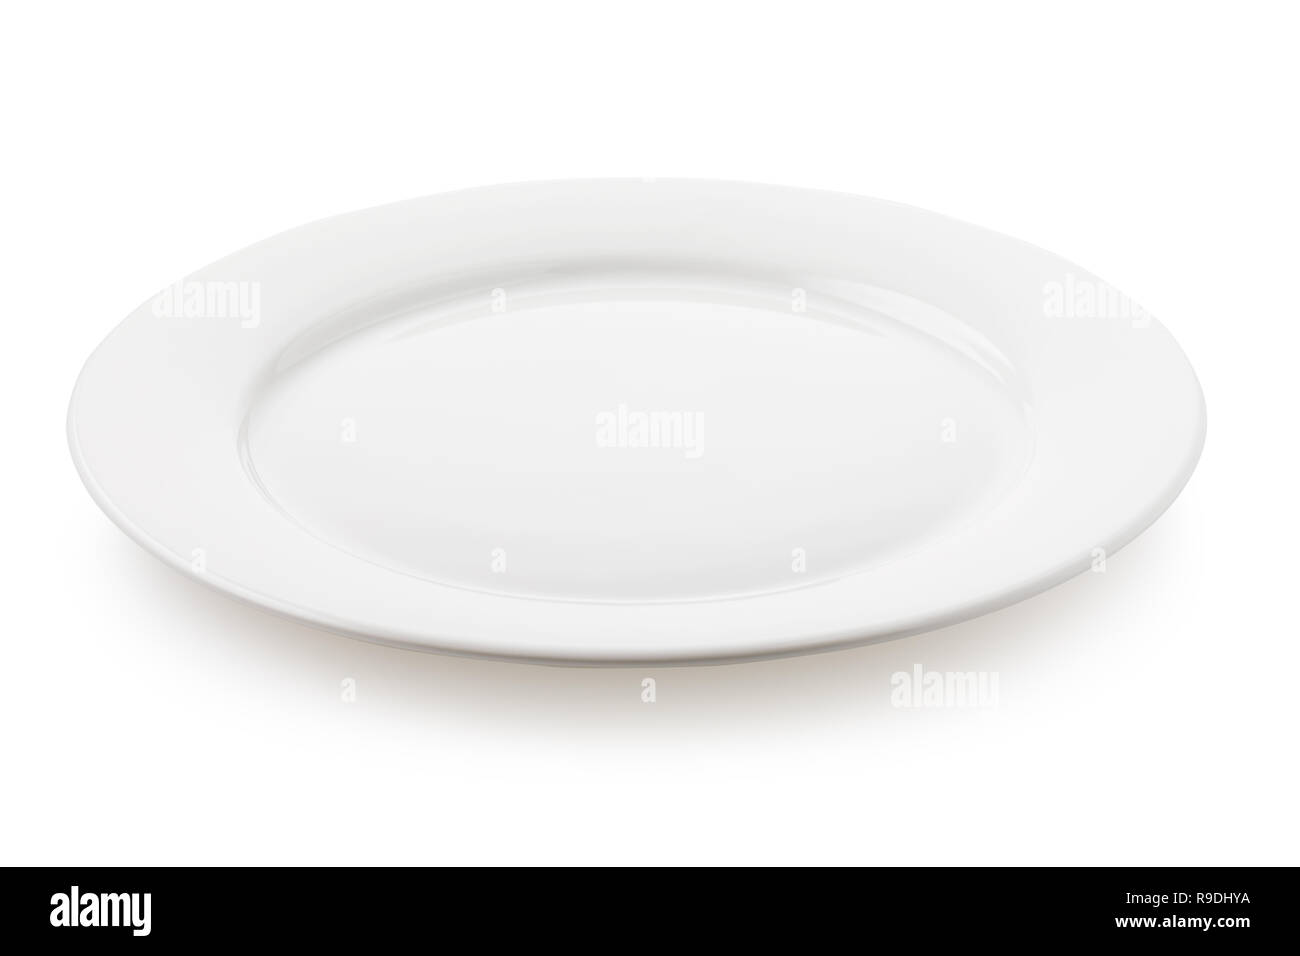 Empty ceramic plate white color, a side view of the isolated object Stock Photo